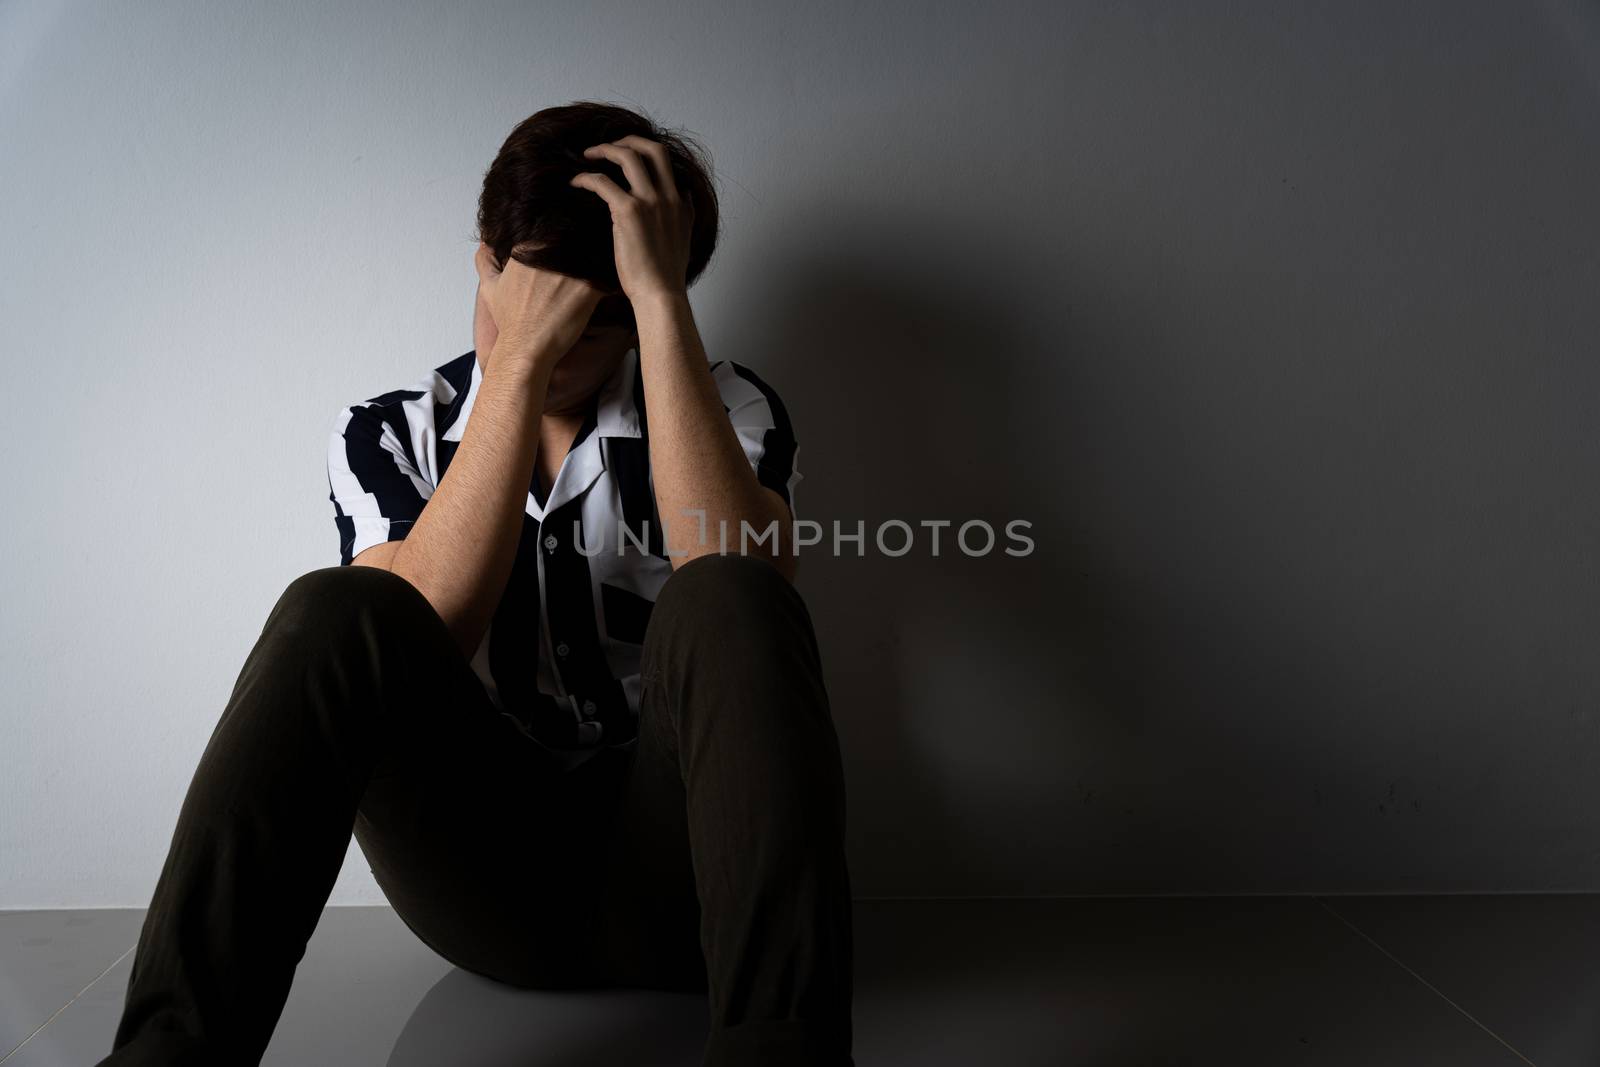 sad man hug her knee and cry sitting alone in a dark room. Depression, unhappy, stressed and anxiety disorder concept.